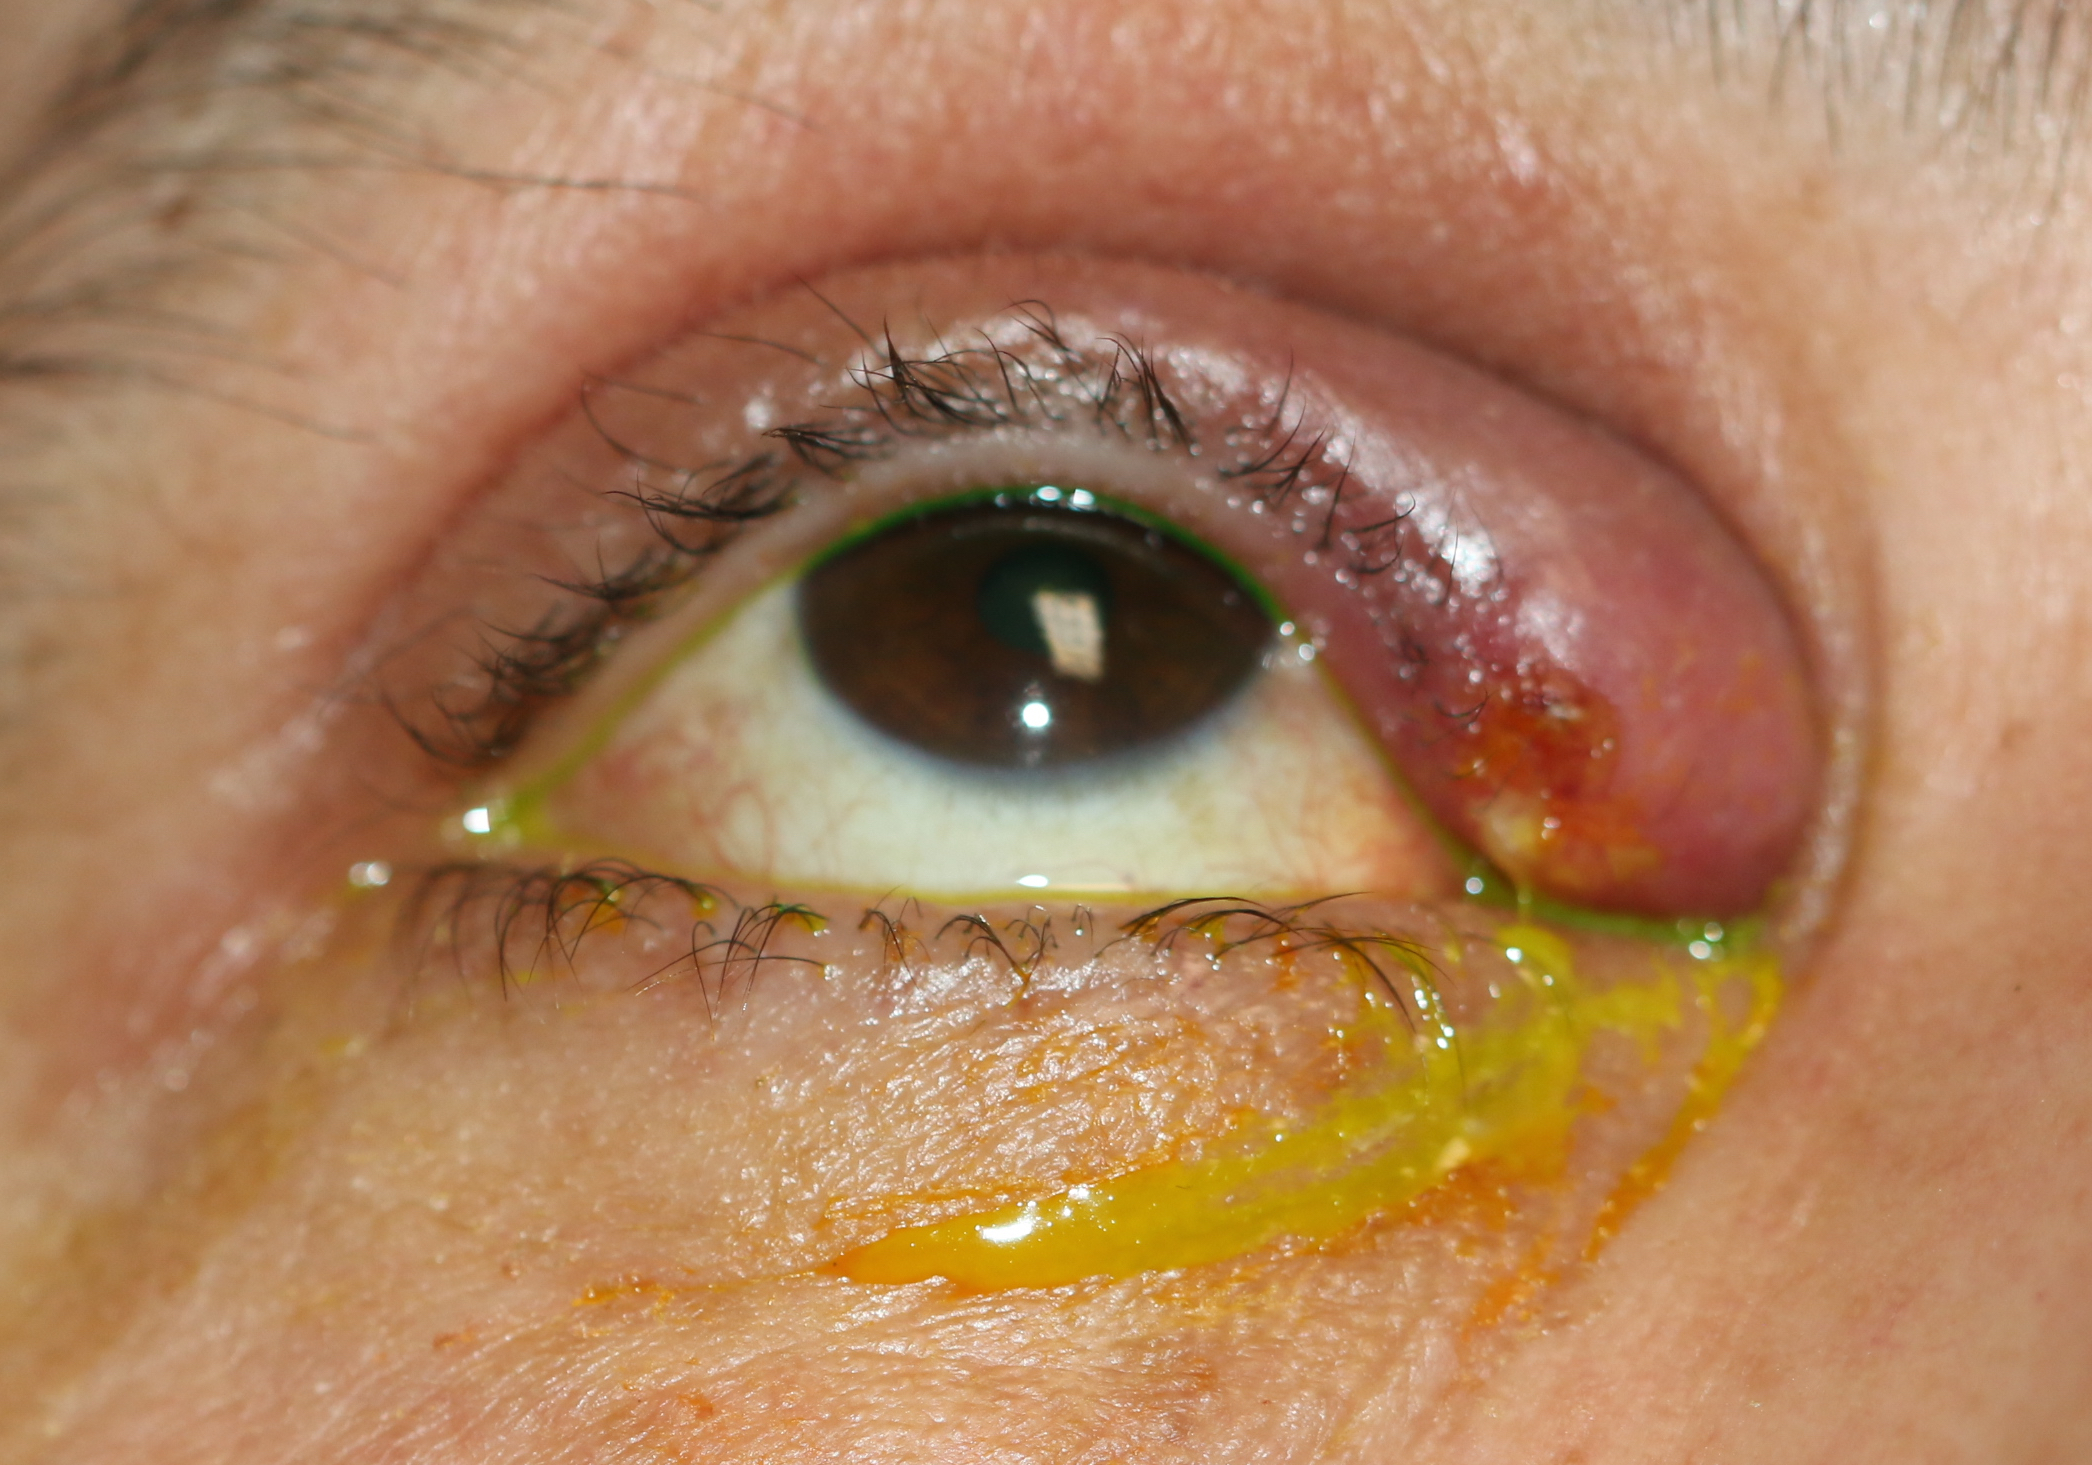 Upper canaliculitis with swelling of the medial upper eyelid, mucoid discharge from the upper punctum and a history of previous placement of a Herrick intra-canalicular plug. The intracanalicular plug was removed via an open dacryocystorhinostomy and the debris within the canaliculus was removed.